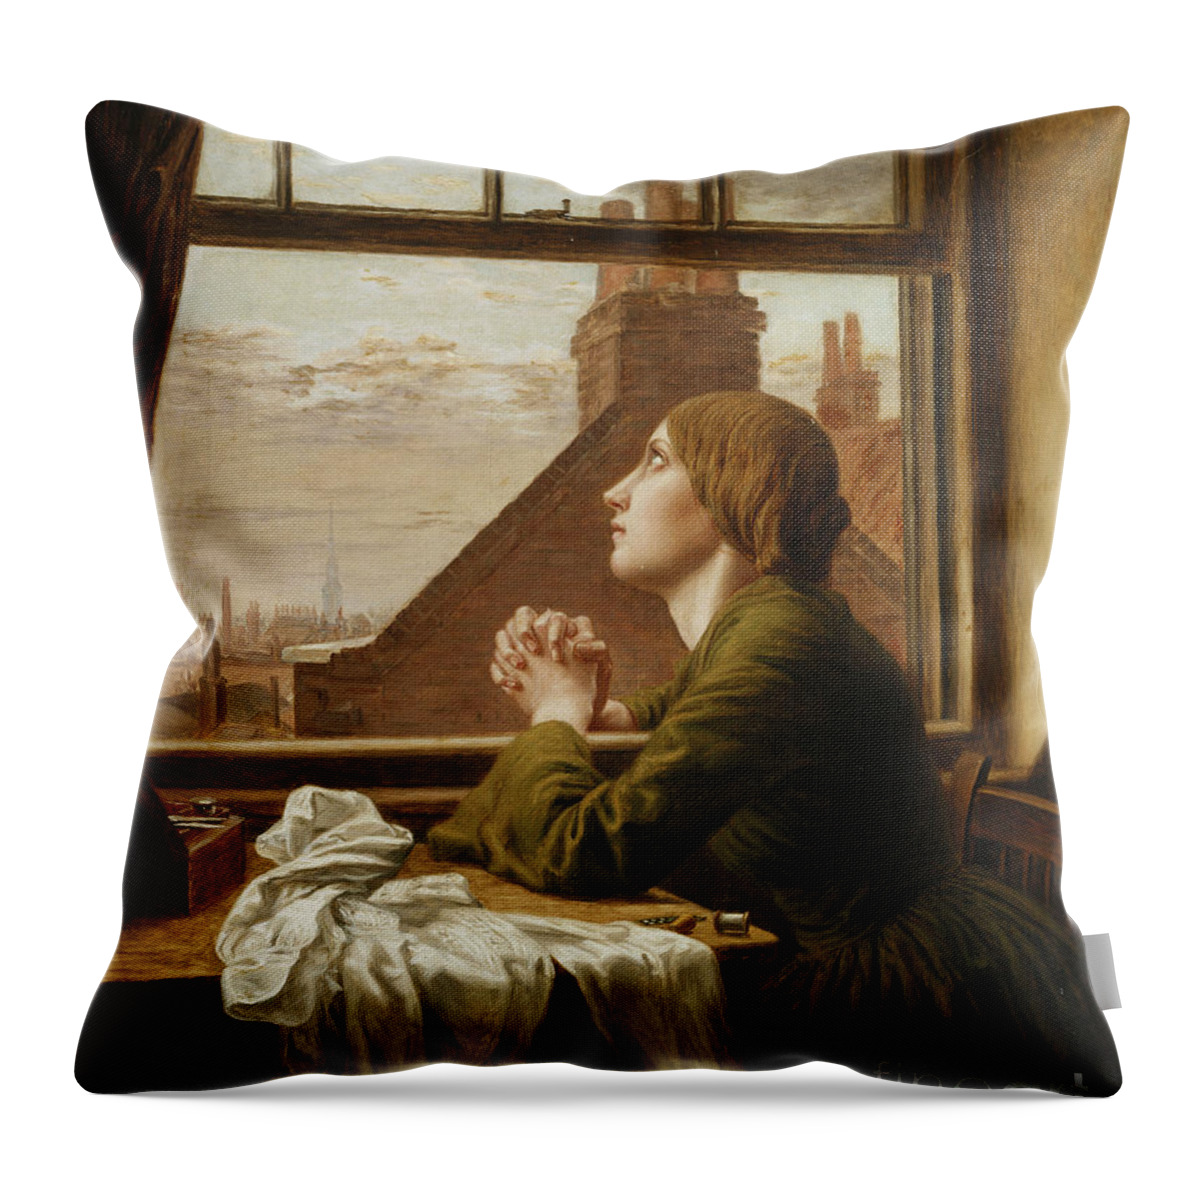 Box Throw Pillow featuring the painting The Song Of The Shirt, 1854 by Anna E. Blunden